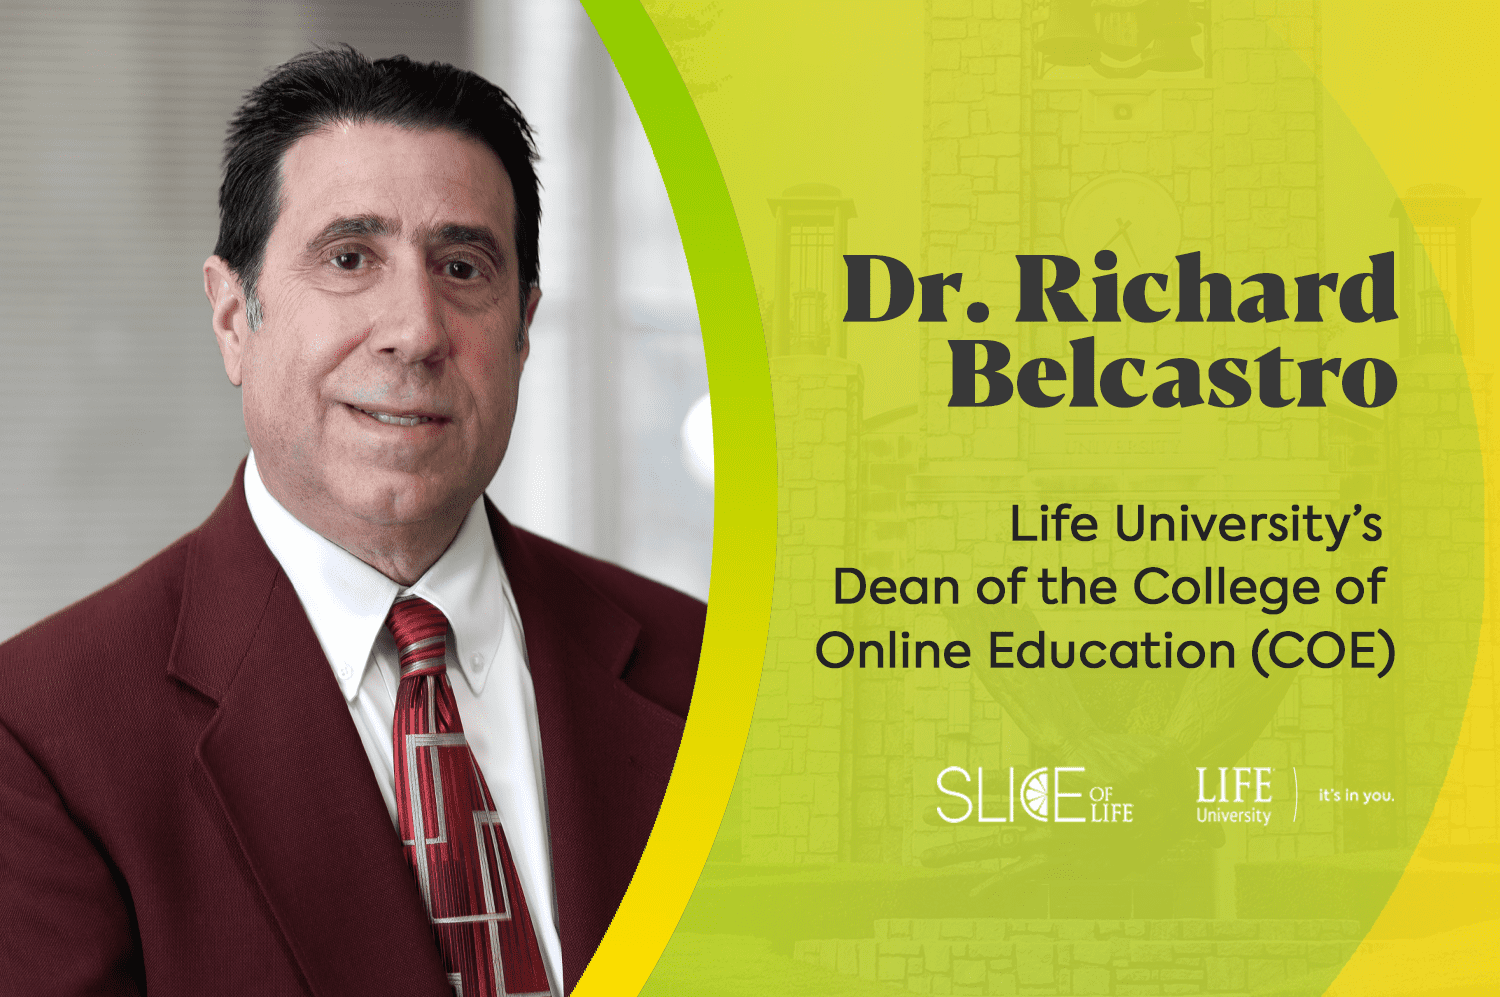 Dr. Richard Belcastro, Dean, College of Online Education (COE) at Life University